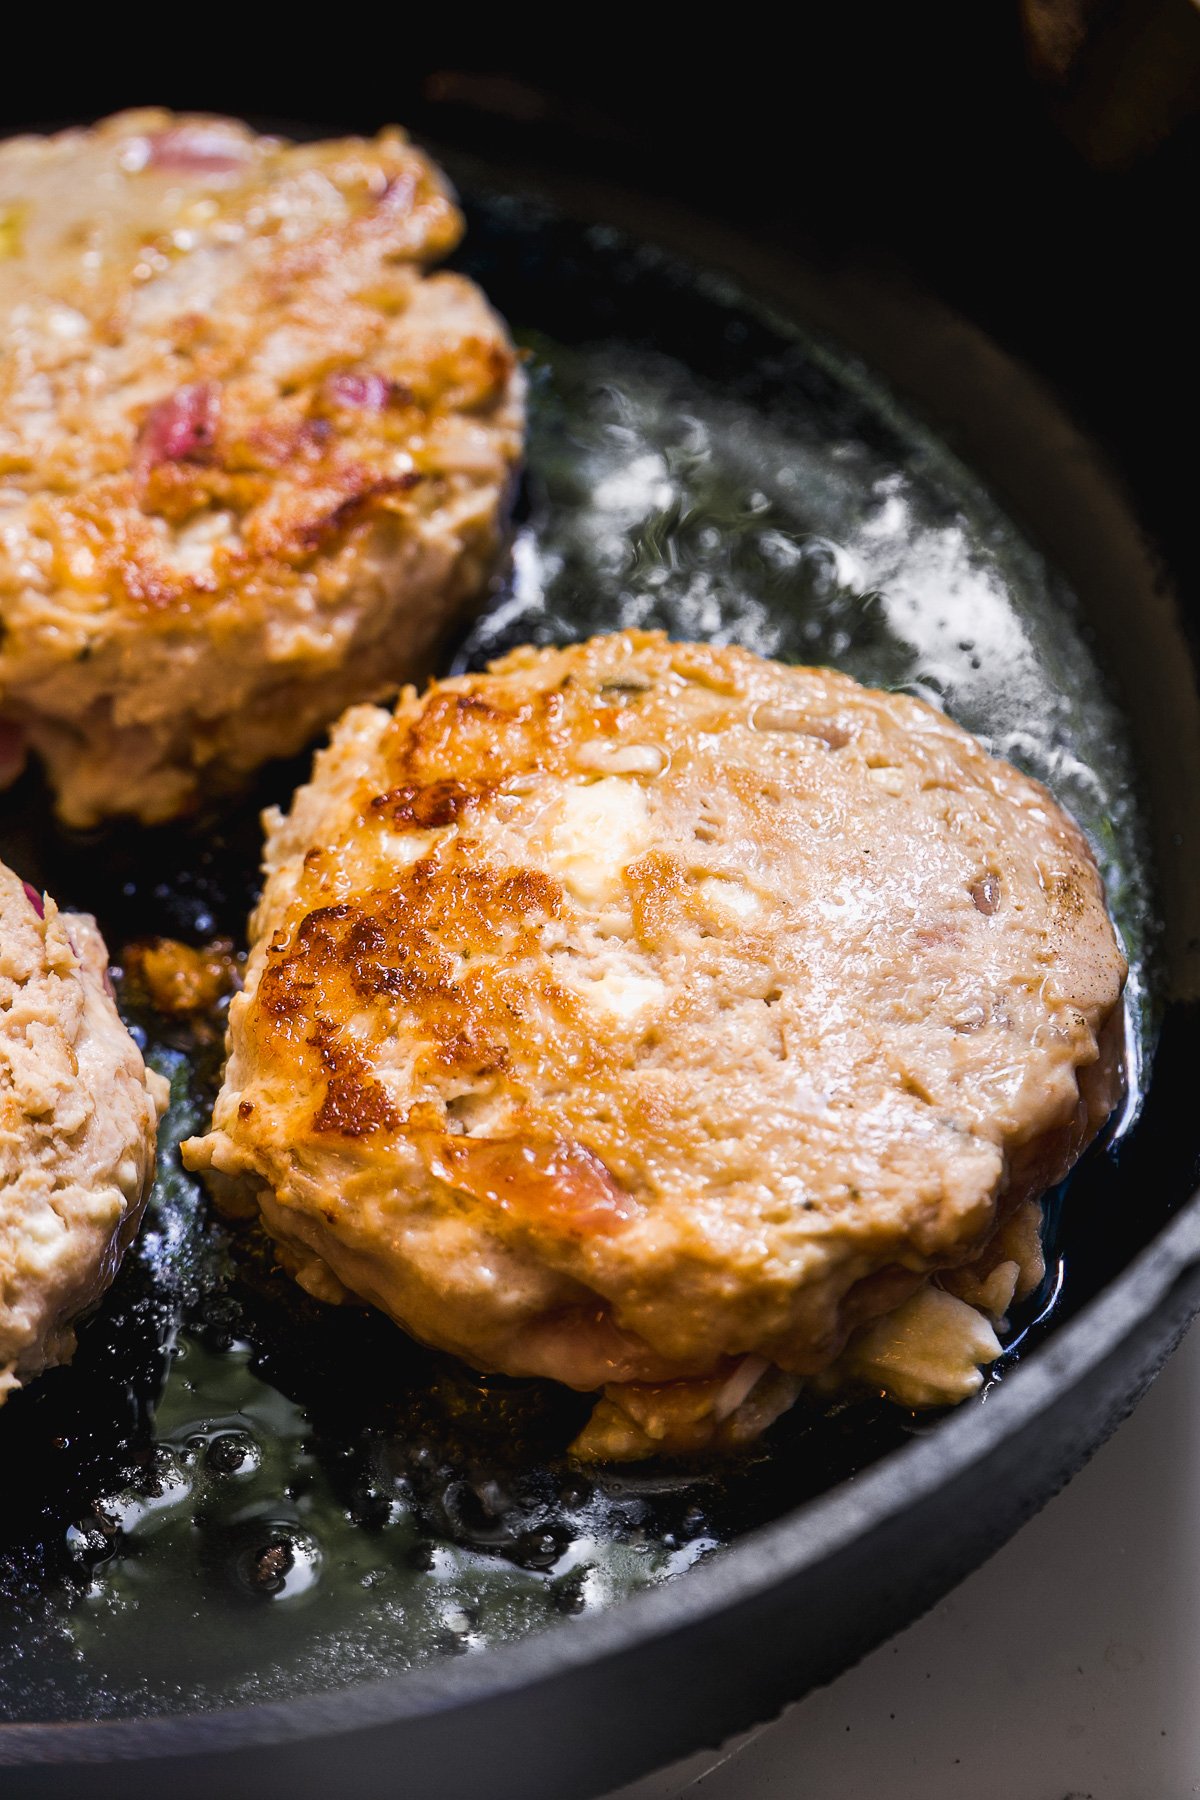 Cooked chicken burgers in a black cast iron pan.